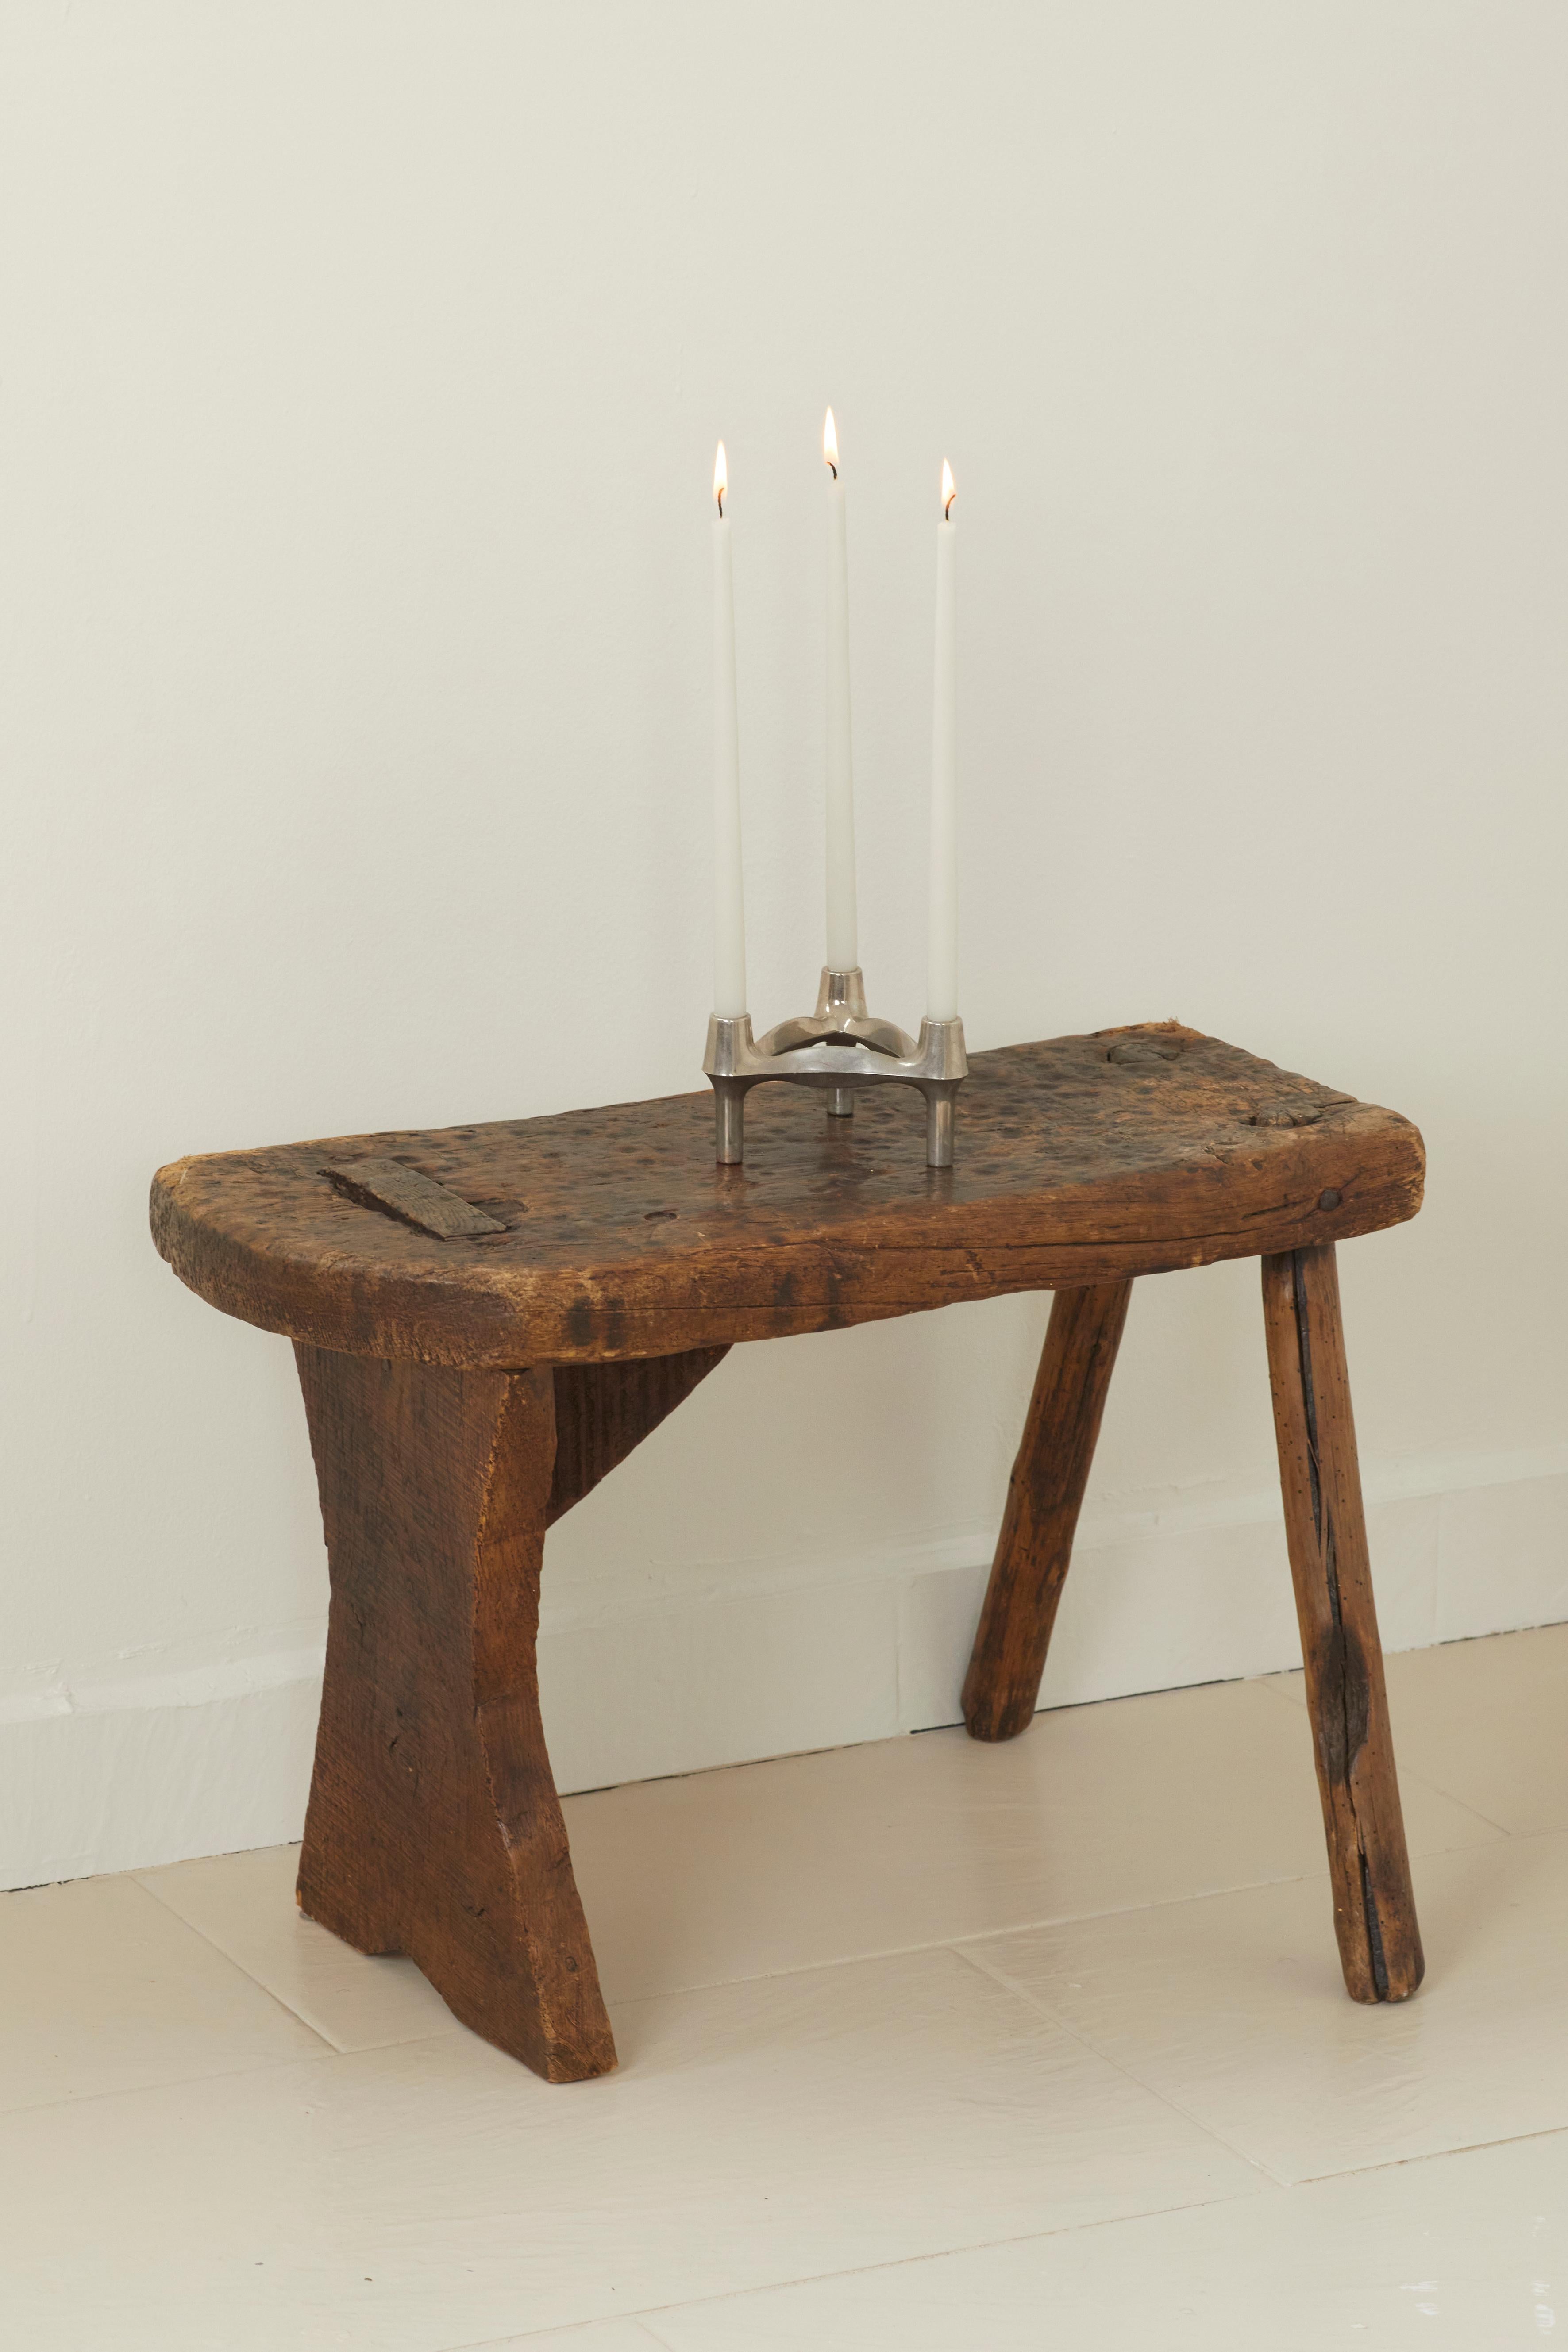 A beautifully aged primitive, rustic stool made from an even older bench, France, c. 1900. Carved and shaped by hand in solid wood. Will support the weight of decorative objects but not sturdy enough to sit on.